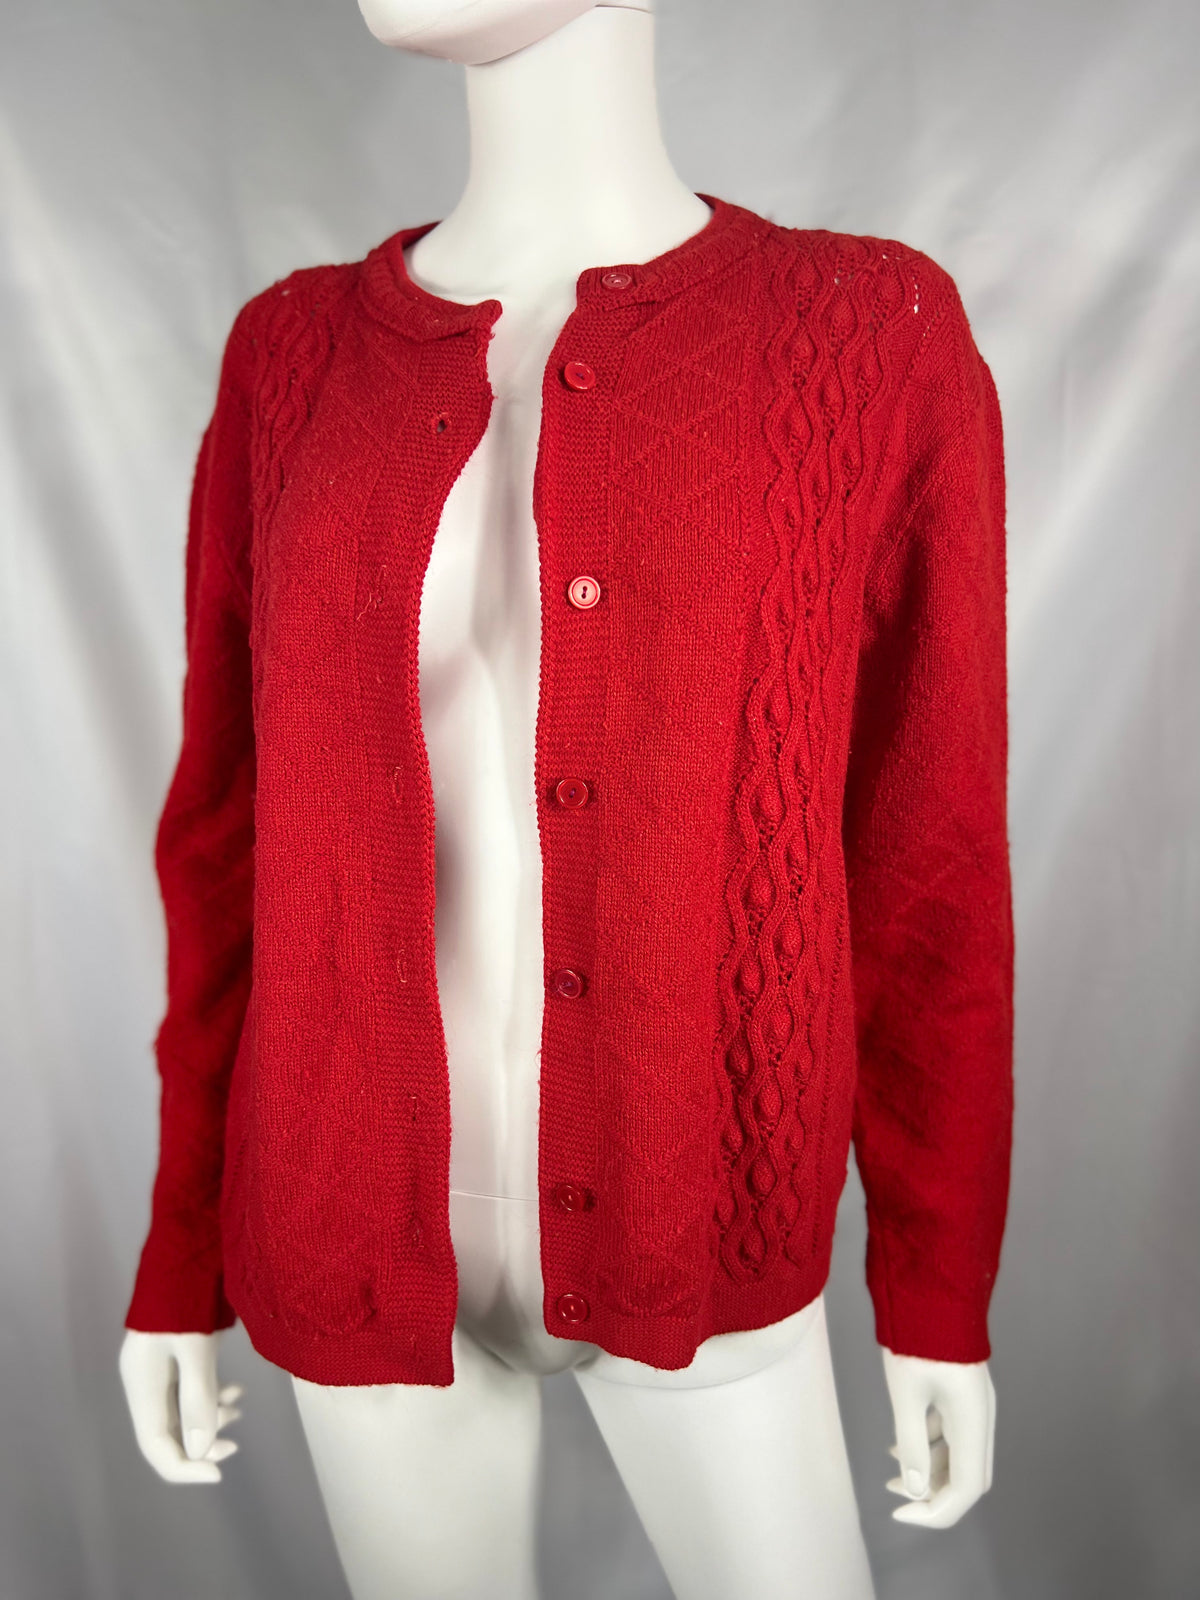 1970's Red Knit Cardigan